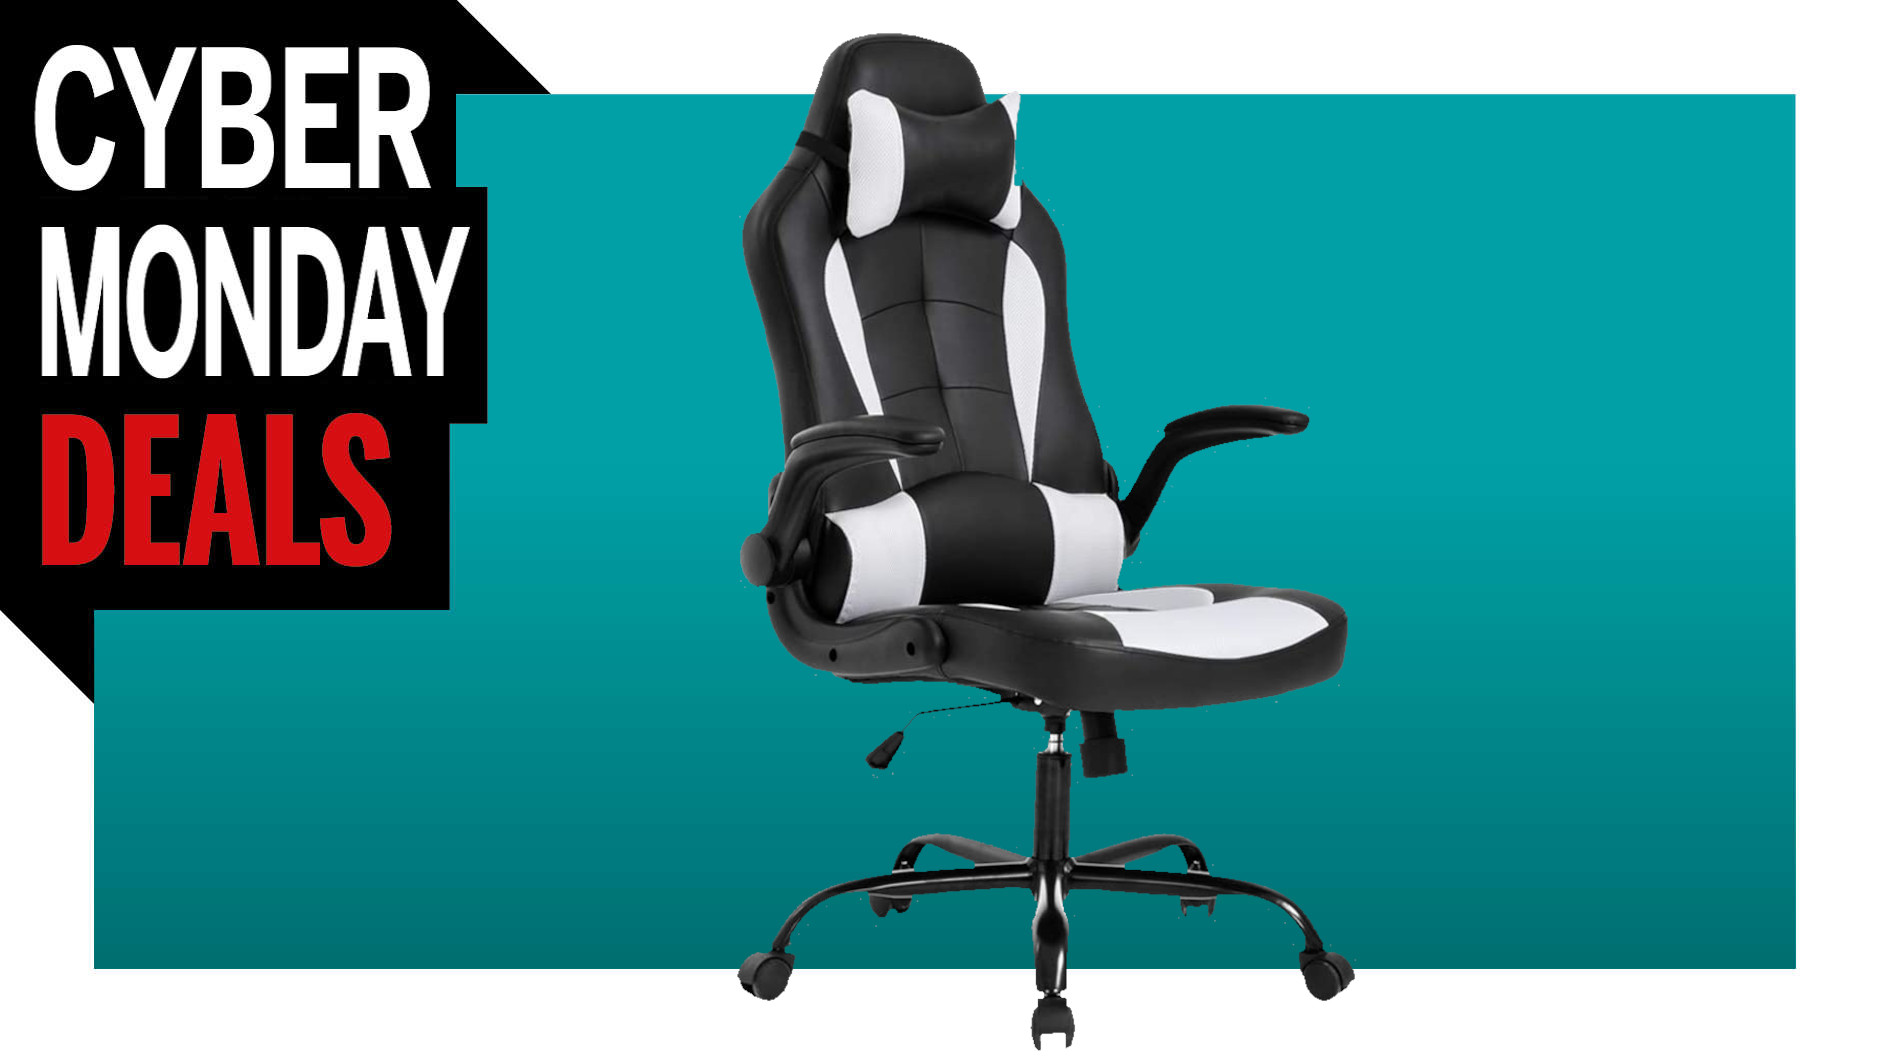  This may be the cheapest gaming chair Cyber Monday deal out there at just $60 